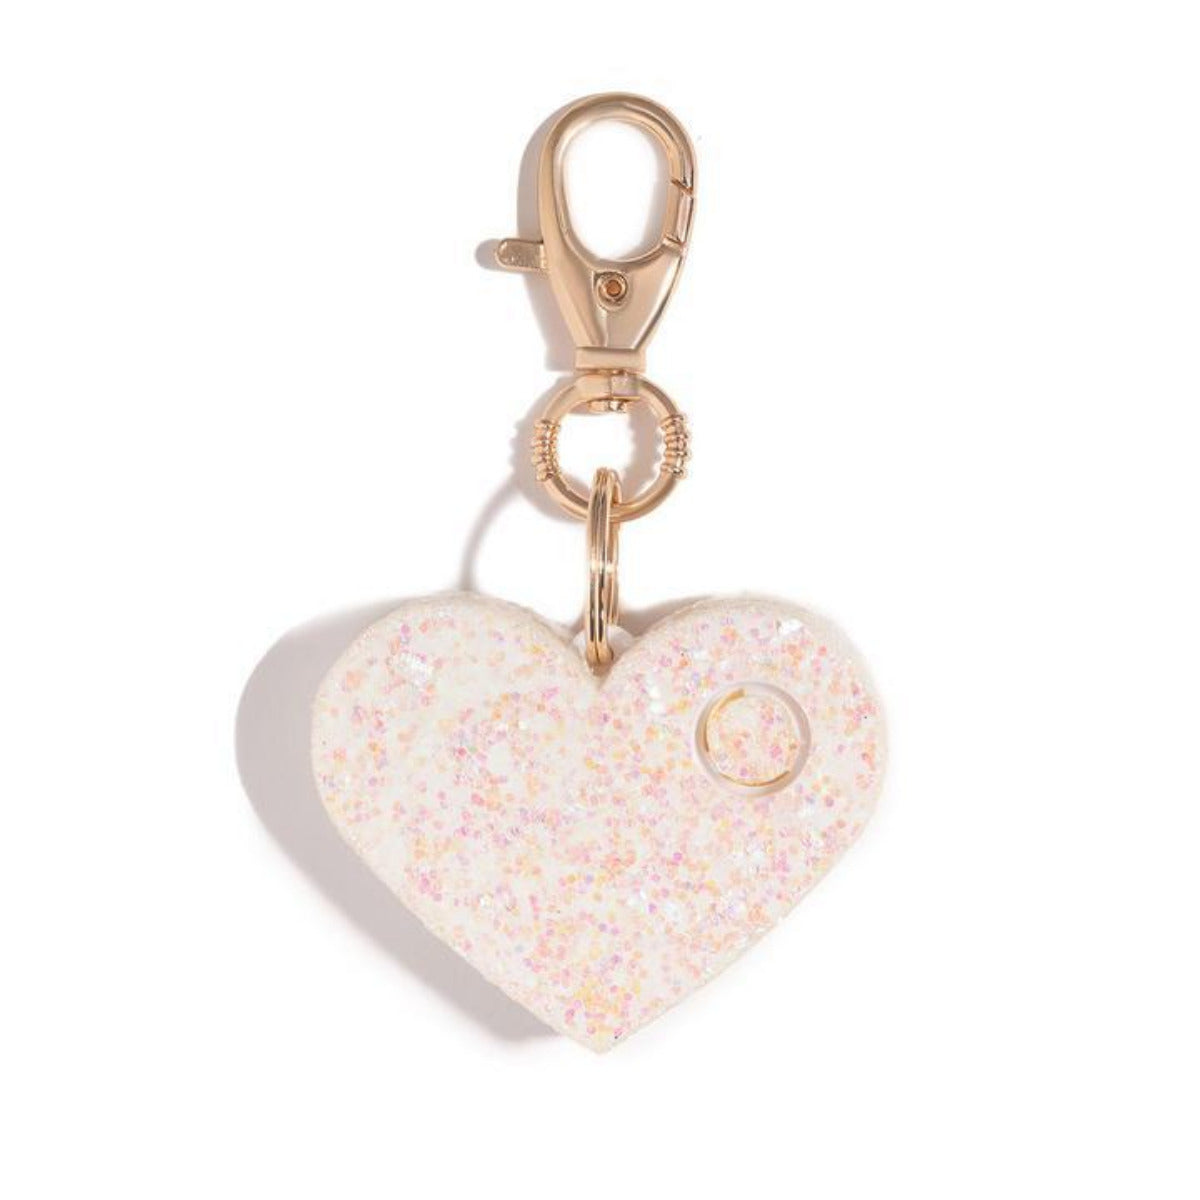 Blingsting Ahh!-larm Personal Safety Alarm Heart Keychain - Pearl Glitter